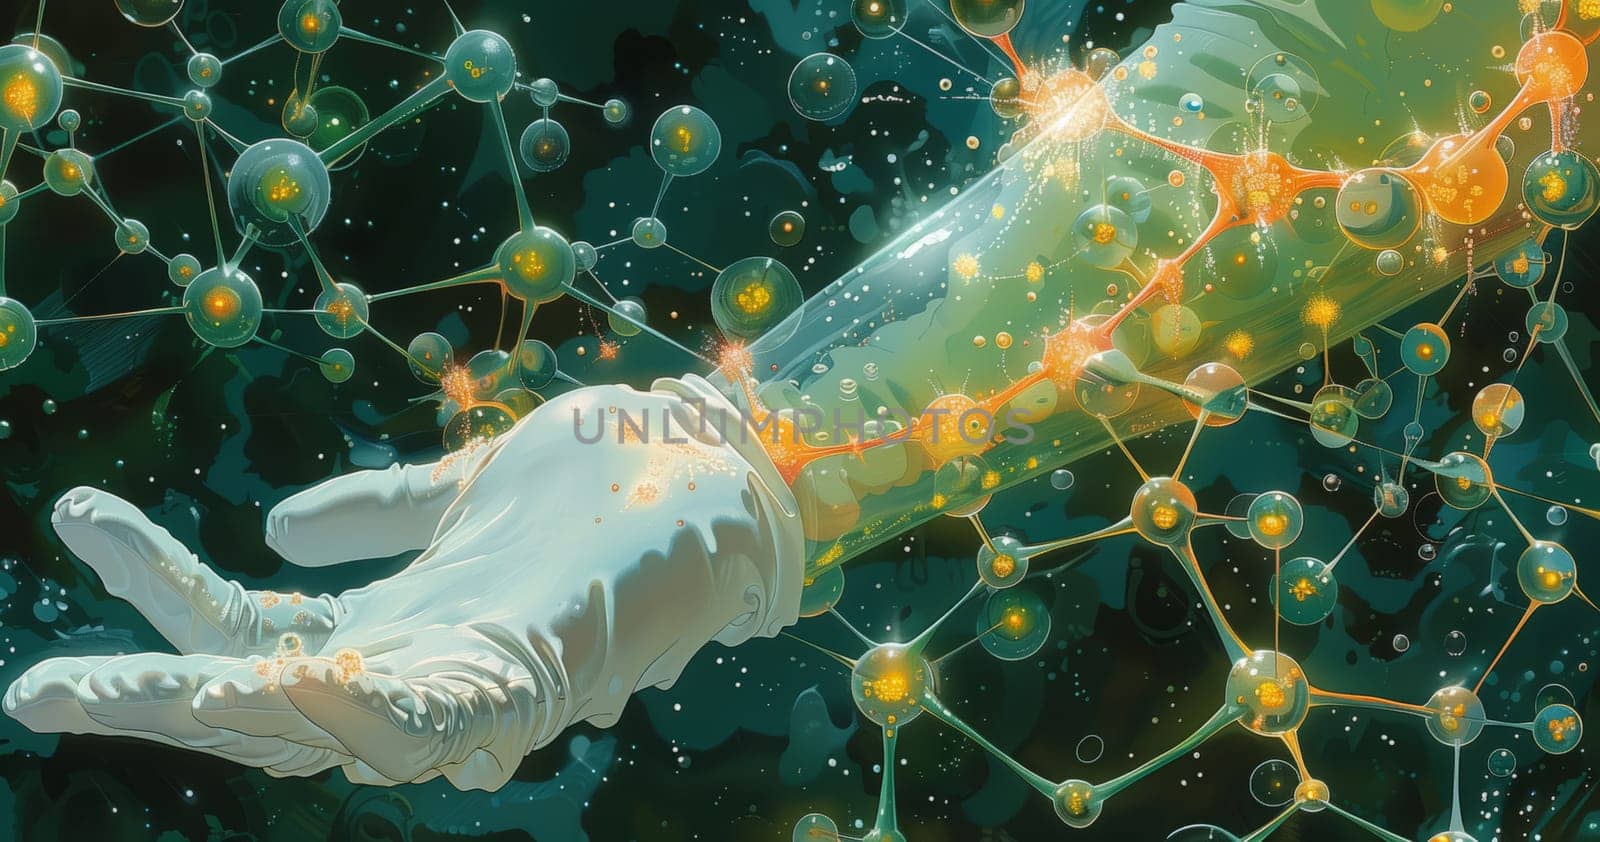 An art piece depicting a hand reaching out towards a molecule in space, combining elements of science, marine biology, and wildlife in a surreal landscape